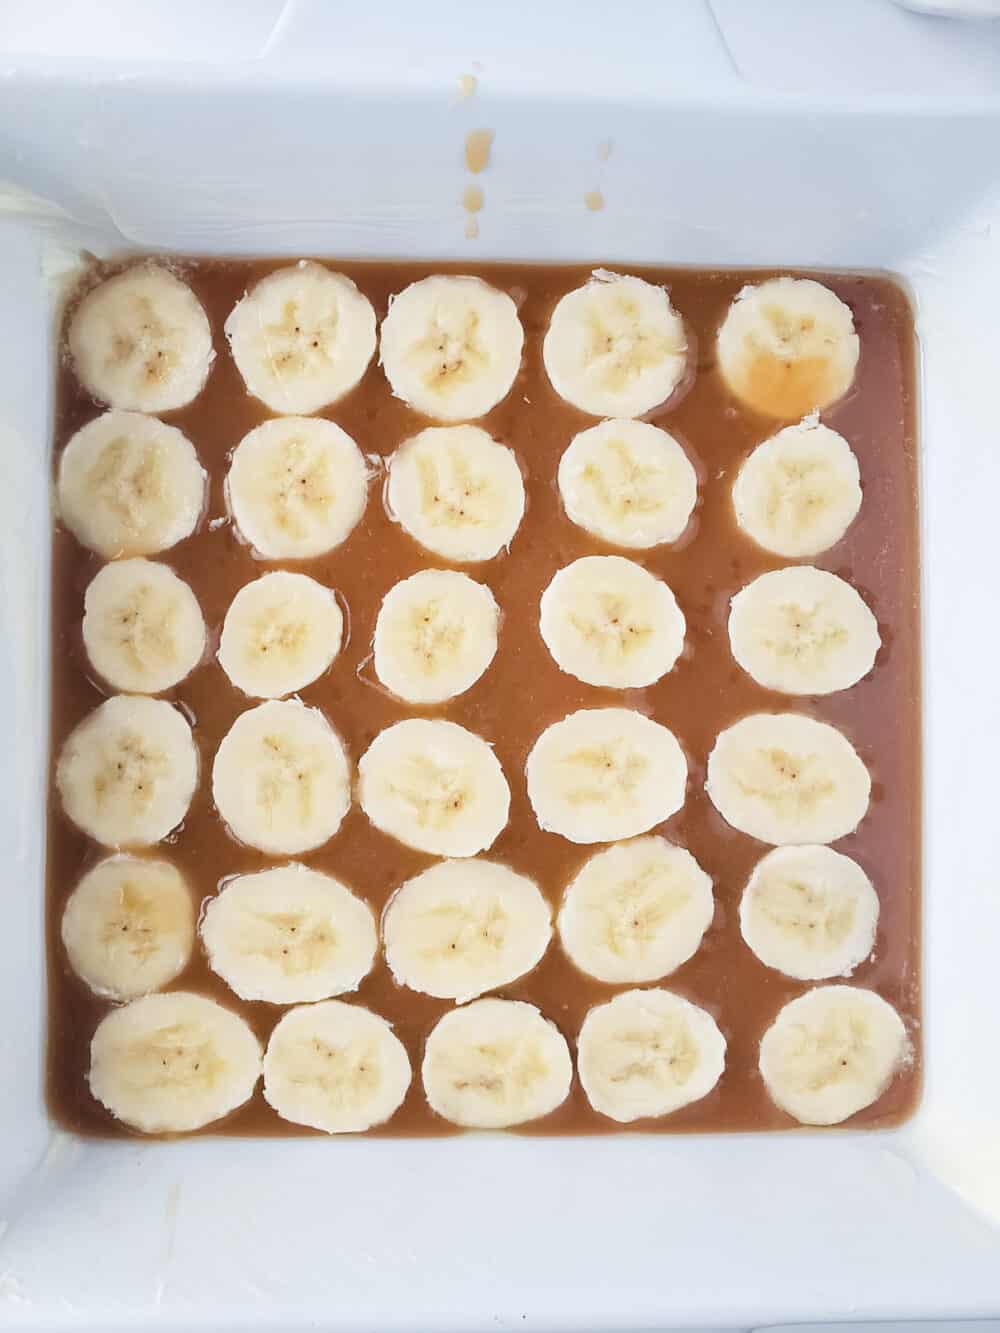 Aerial view of a homemade caramel base, topped with sliced bananas in a white casserole dish